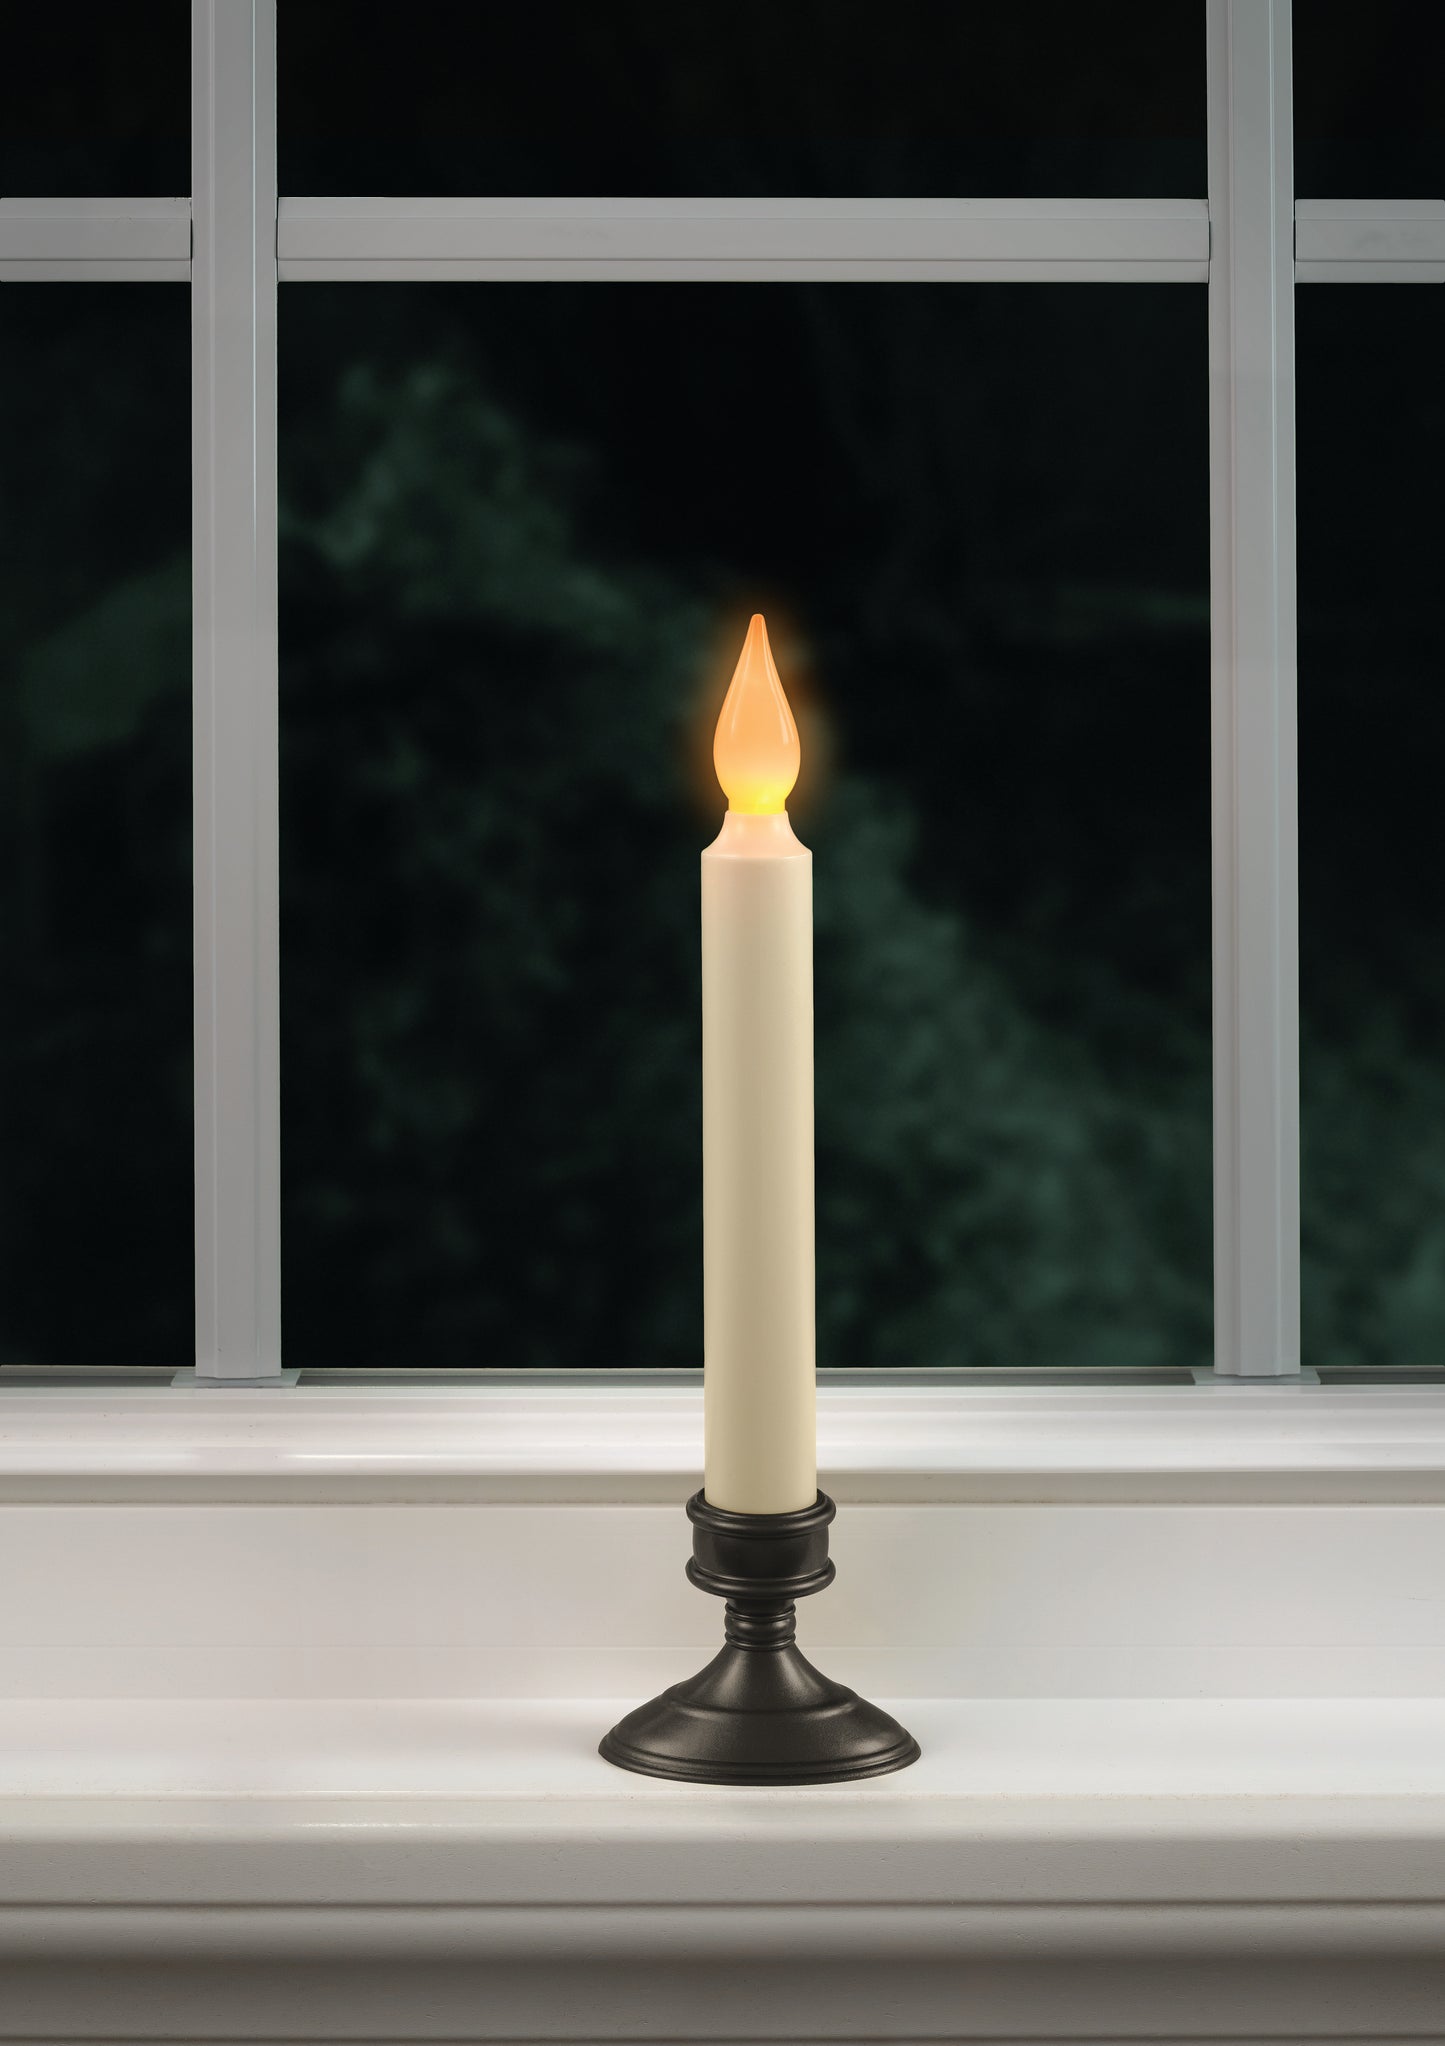 Smithtown Battery Operated Window Candle